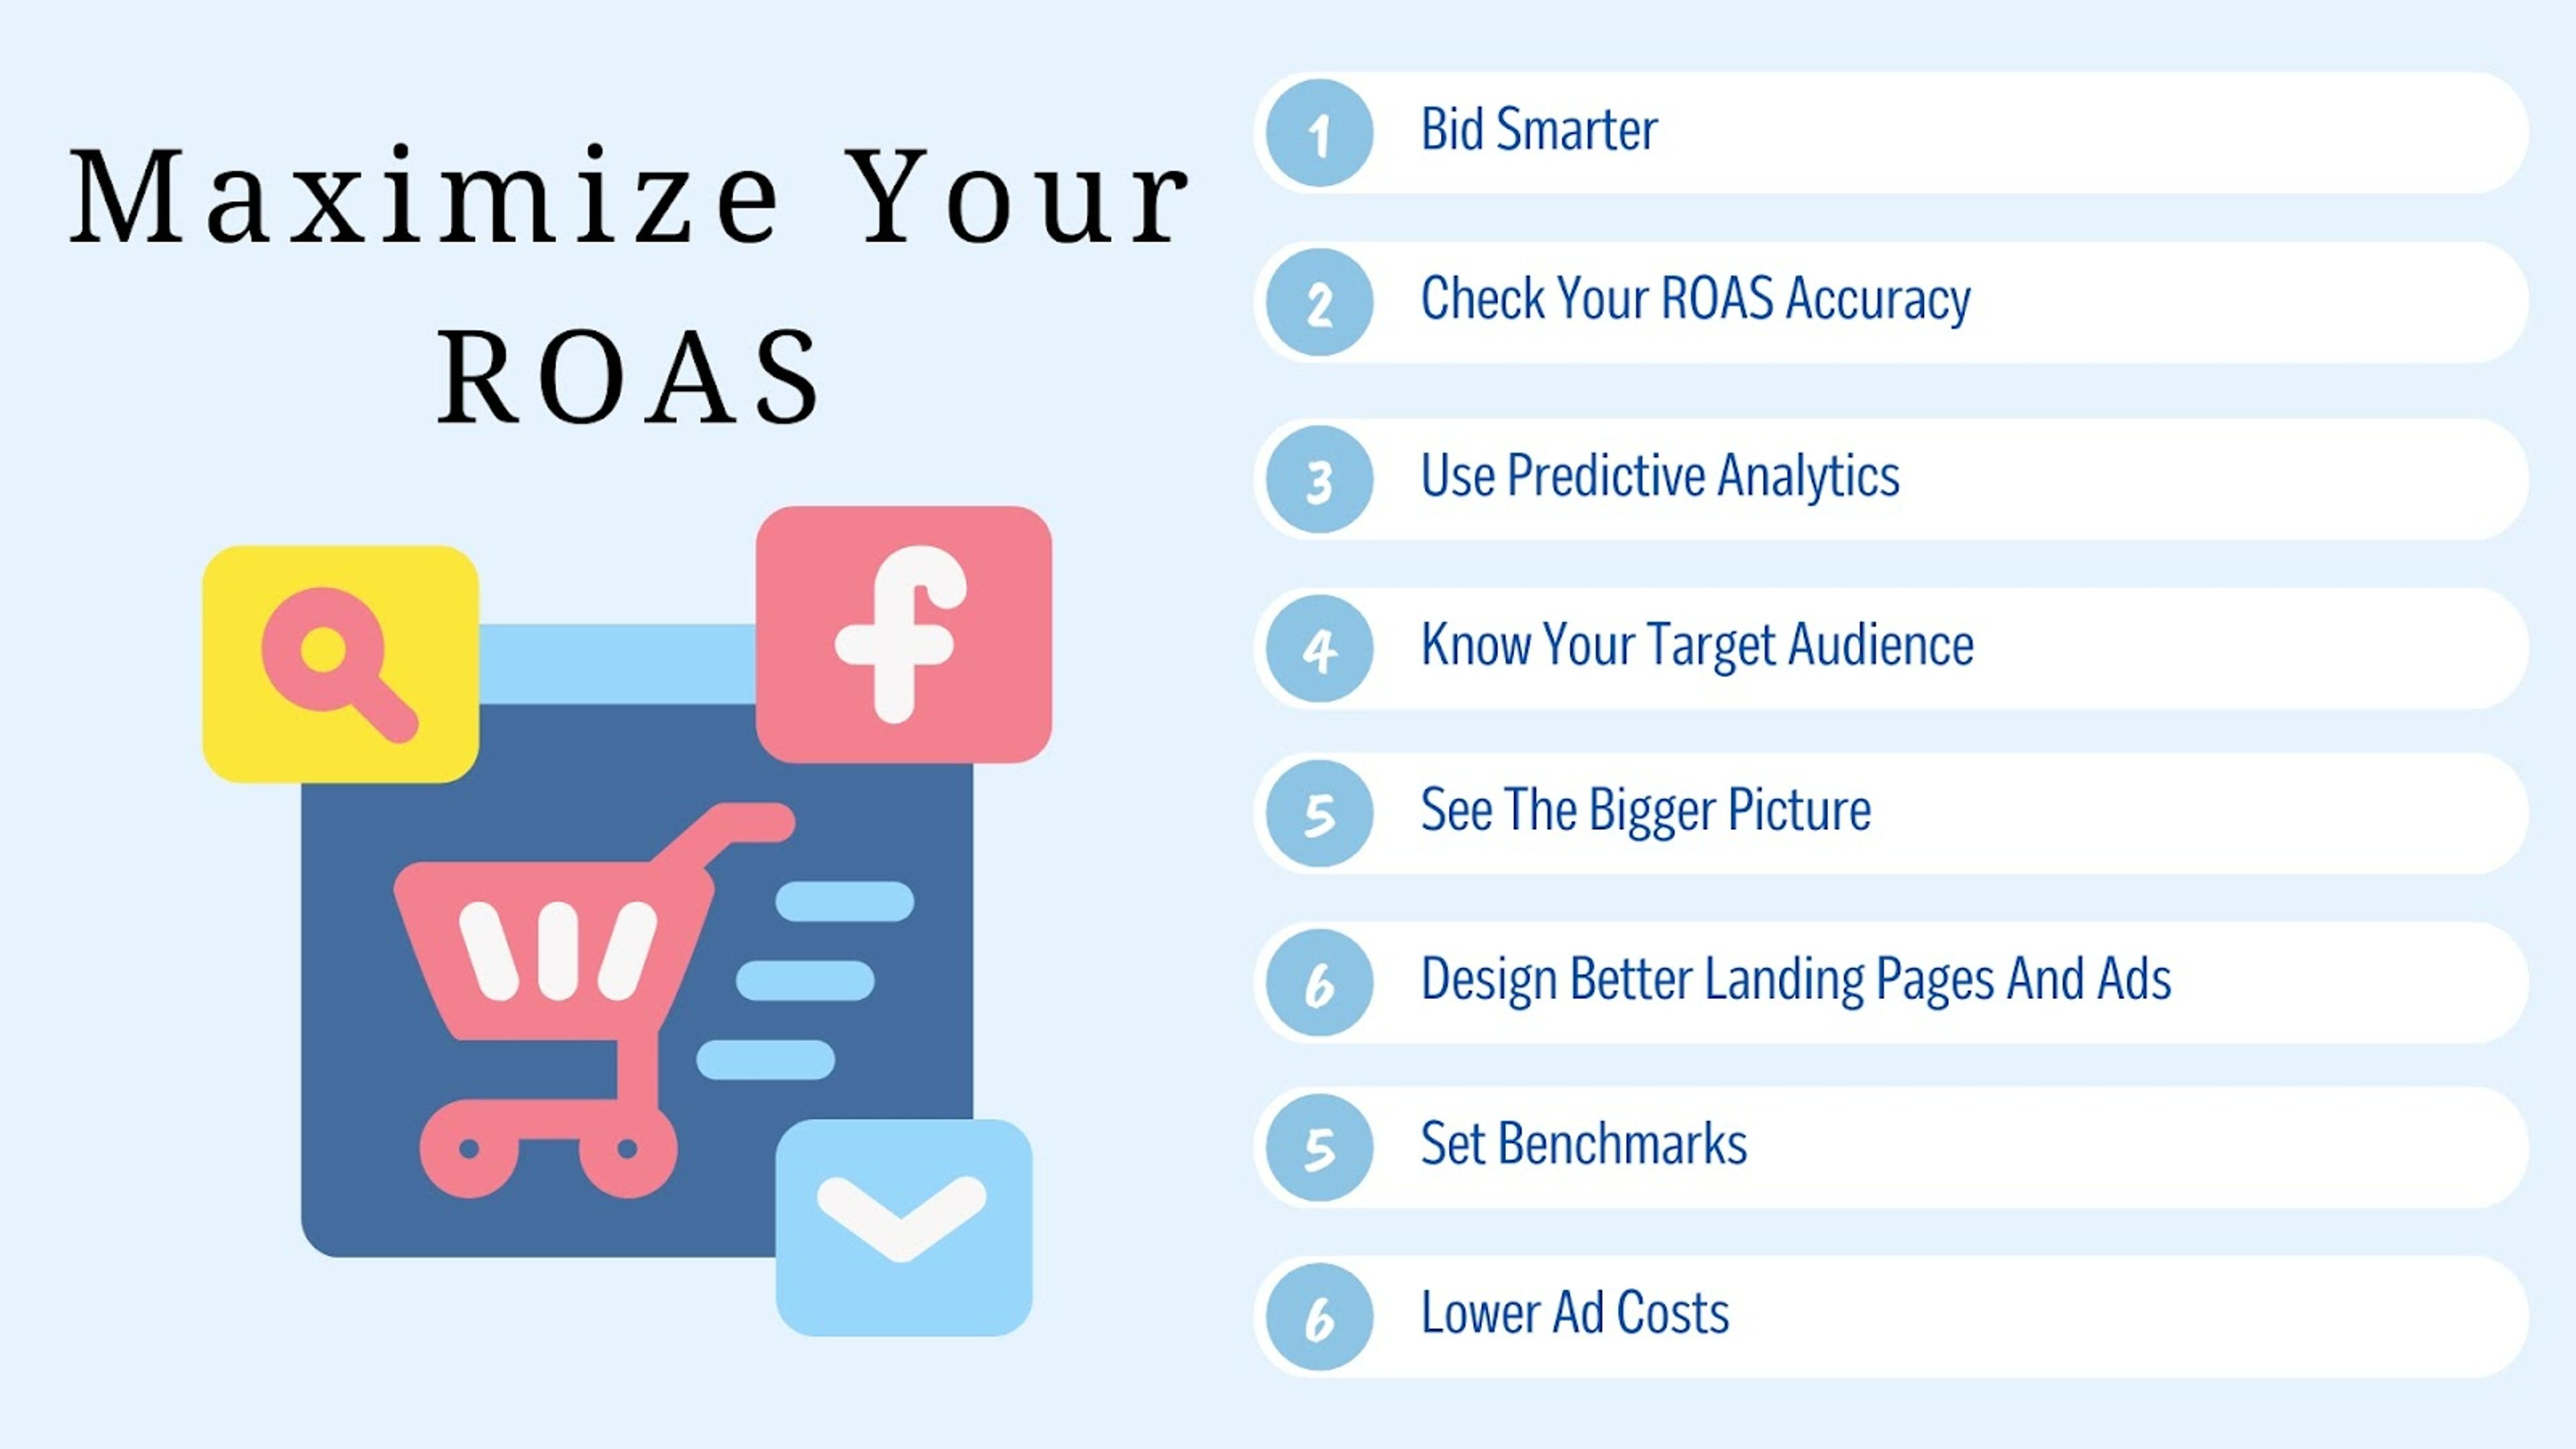 How to Maximize your ROAS